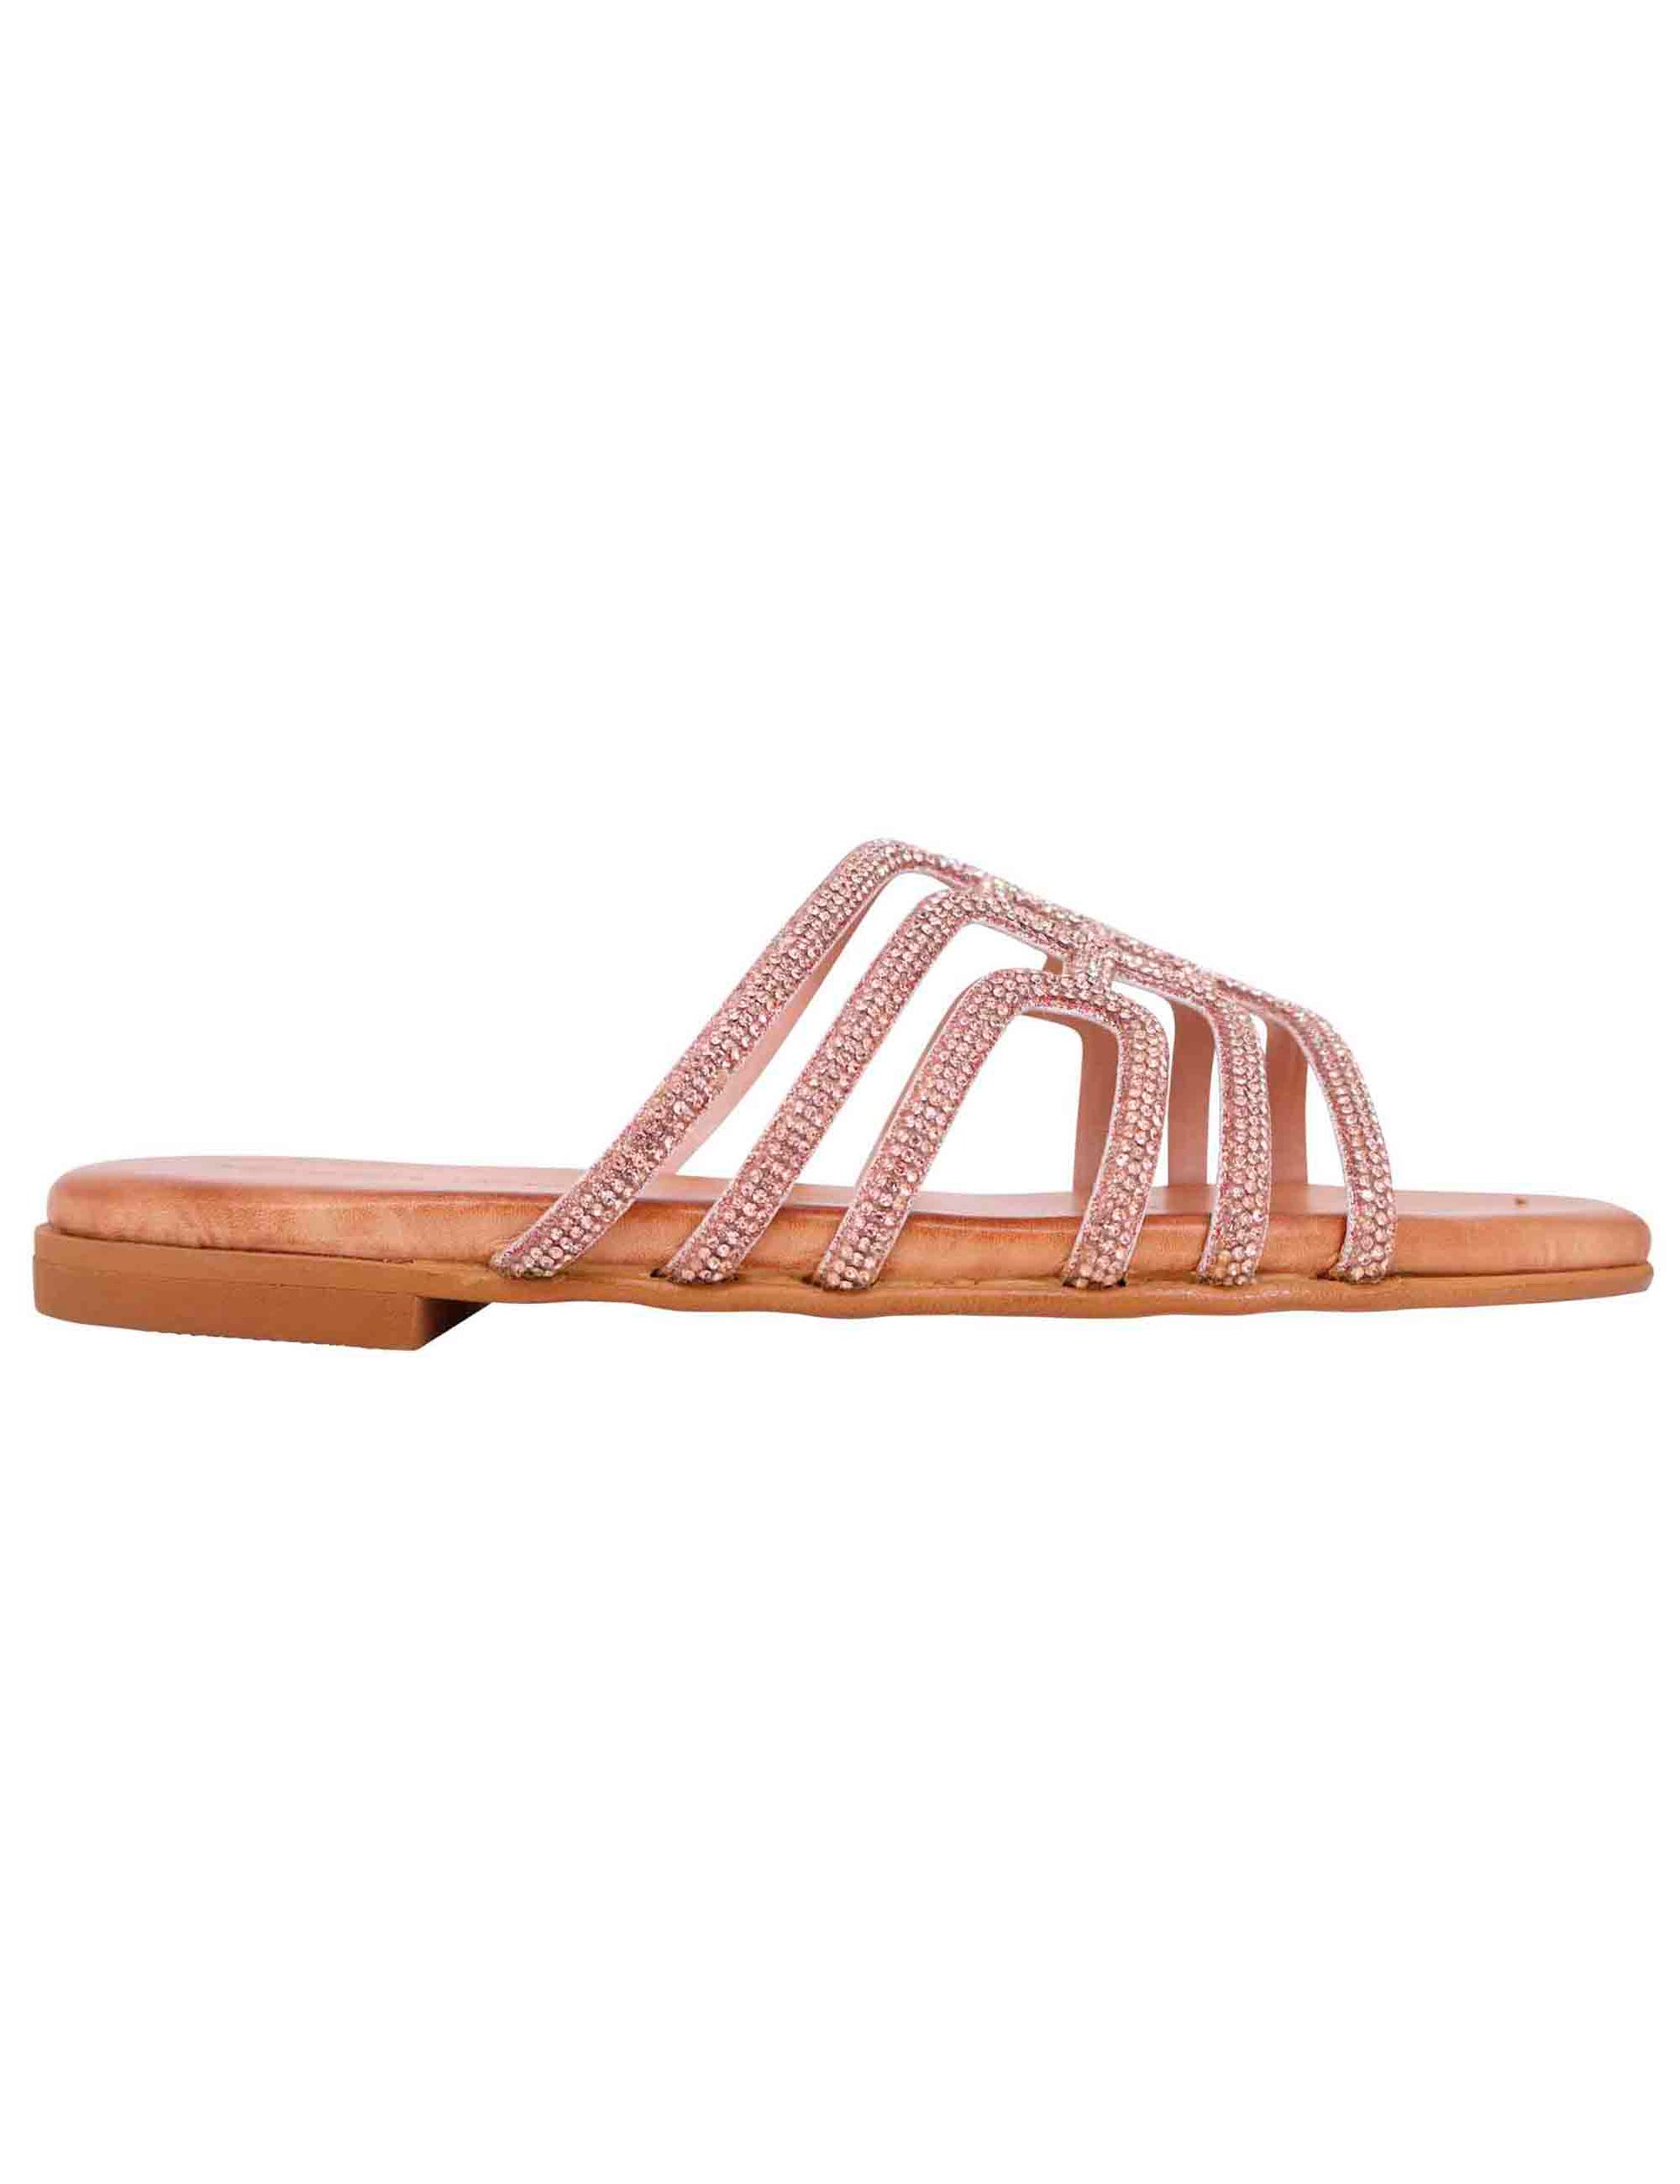 Women's flat sandals in pink rhinestones with soft insole